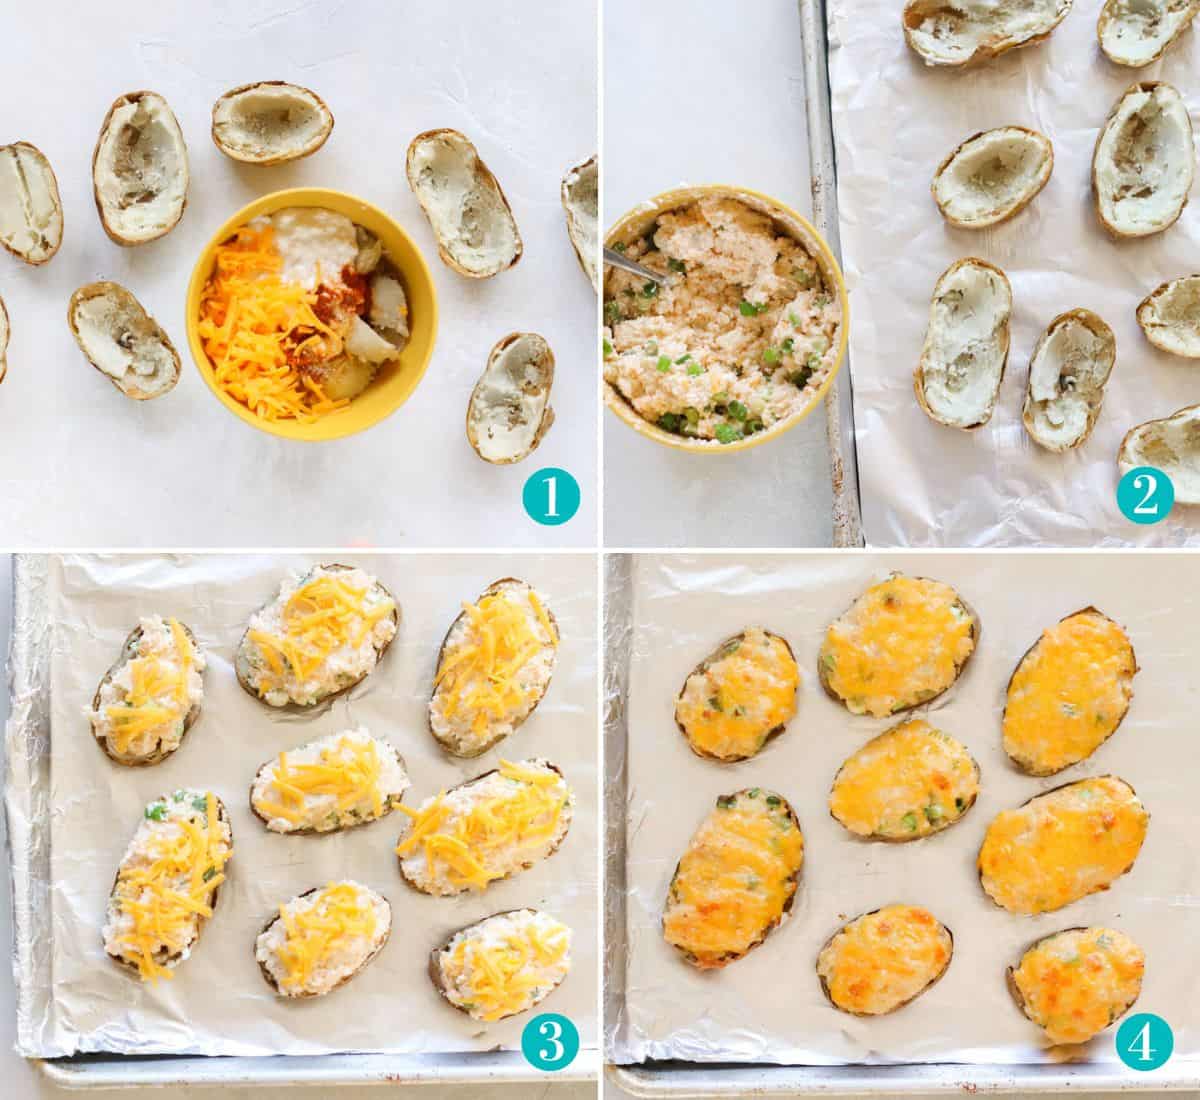 four photo collage with yellow bowl full of cheeses and potatoes surrounded by potato skins, potato skins on baking sheet next to bowl of mashed potato and cheese, baking sheet with twice baked potatoes before baking, baking sheet with twice baked potatoes after baking